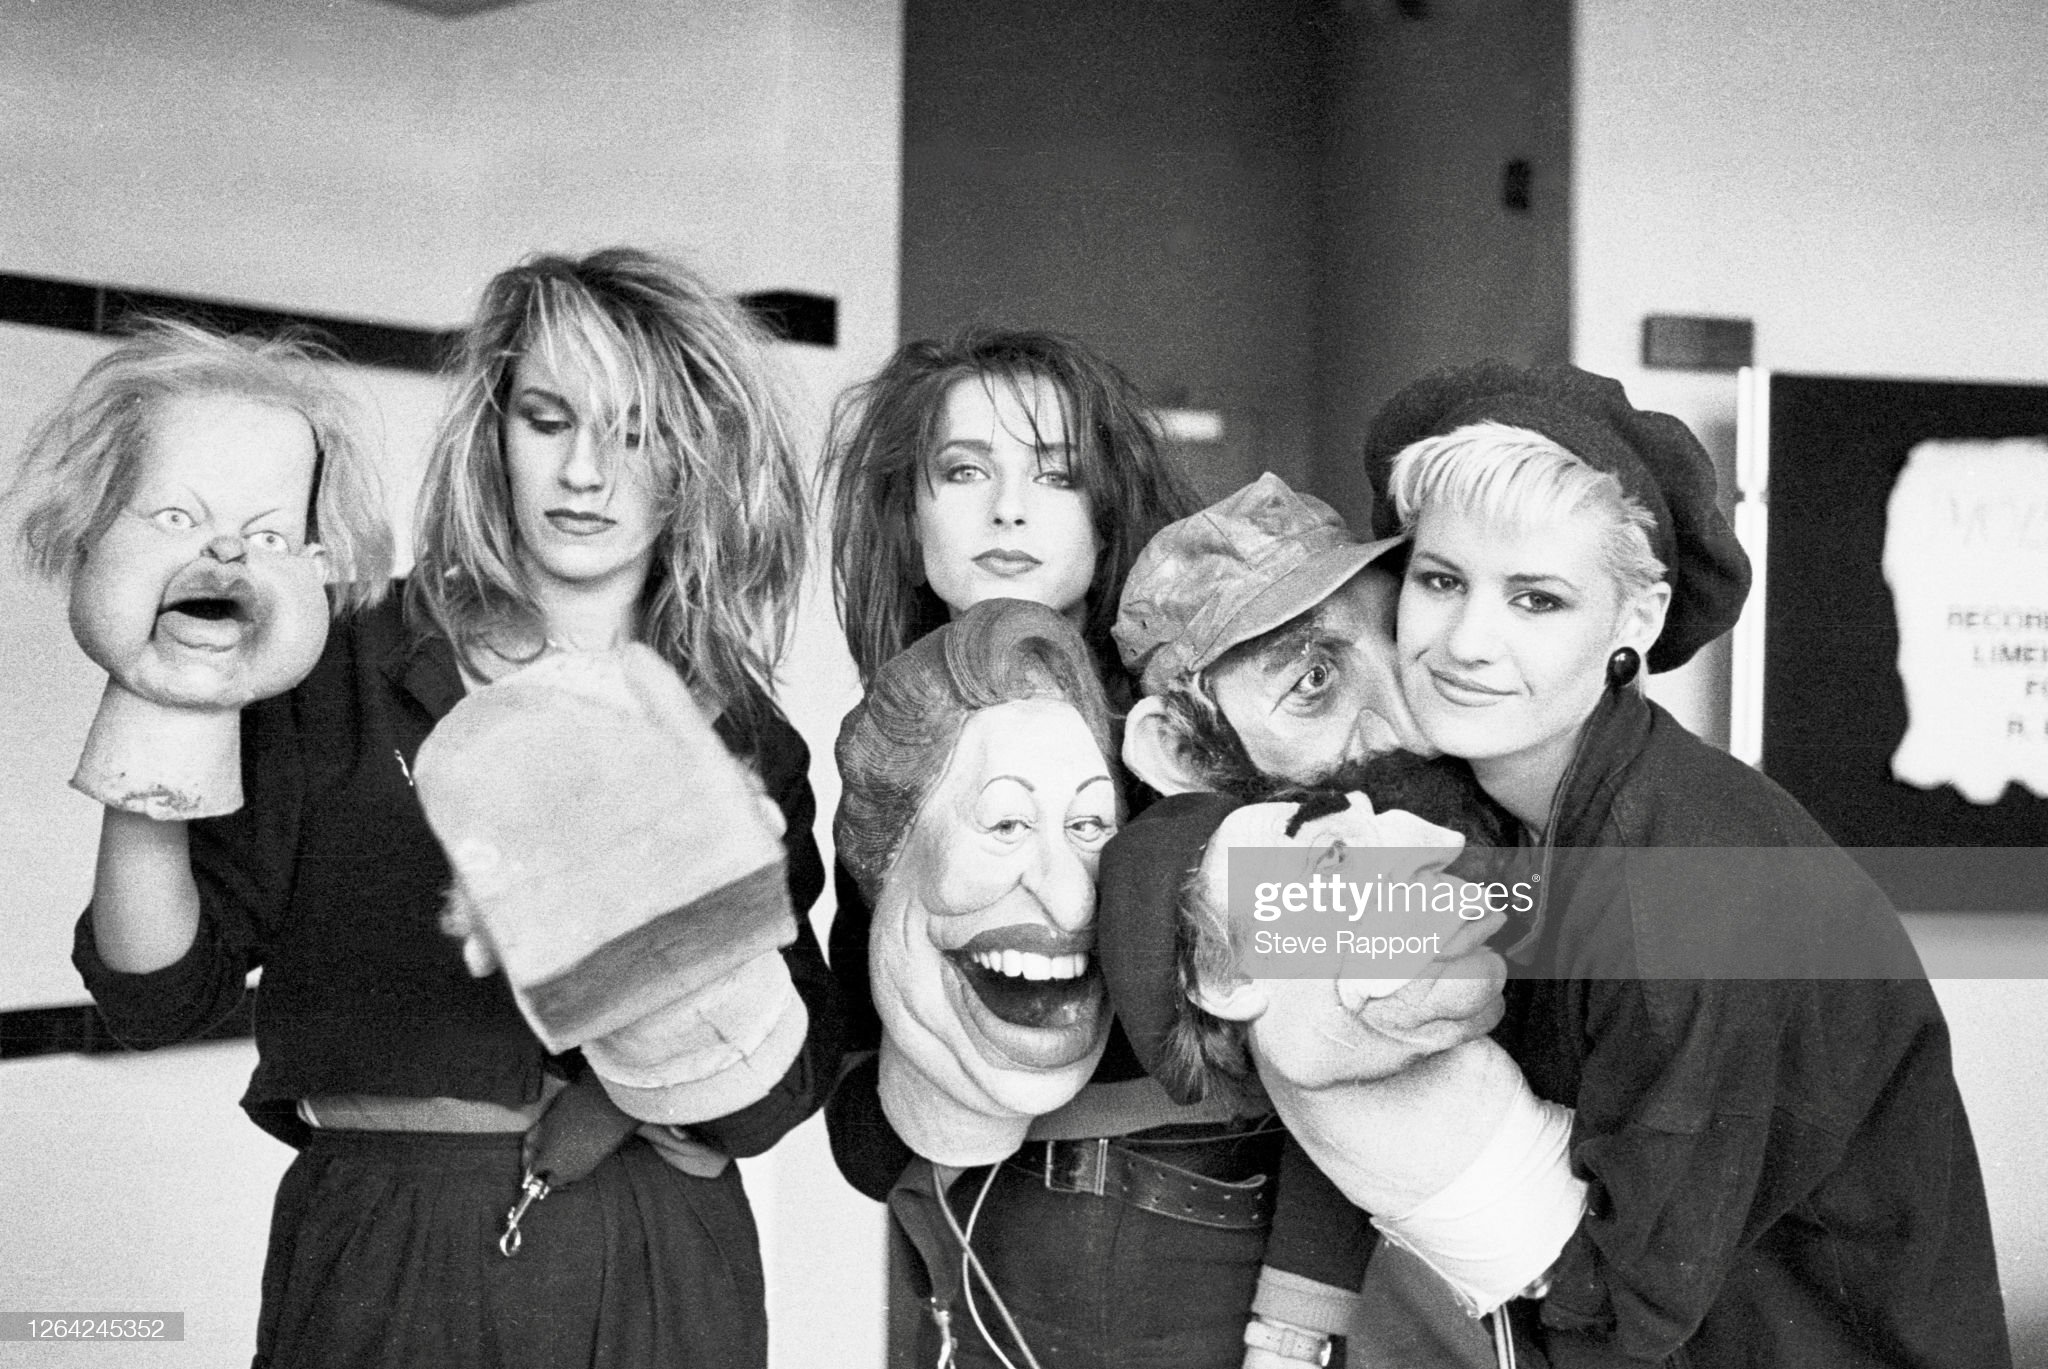 Members of Pop group Bananarama, with puppets by Spitting Image, film the 'Rough Justice' music video, 5/4/1984. (Photo by Steve Rapport/Getty Images)